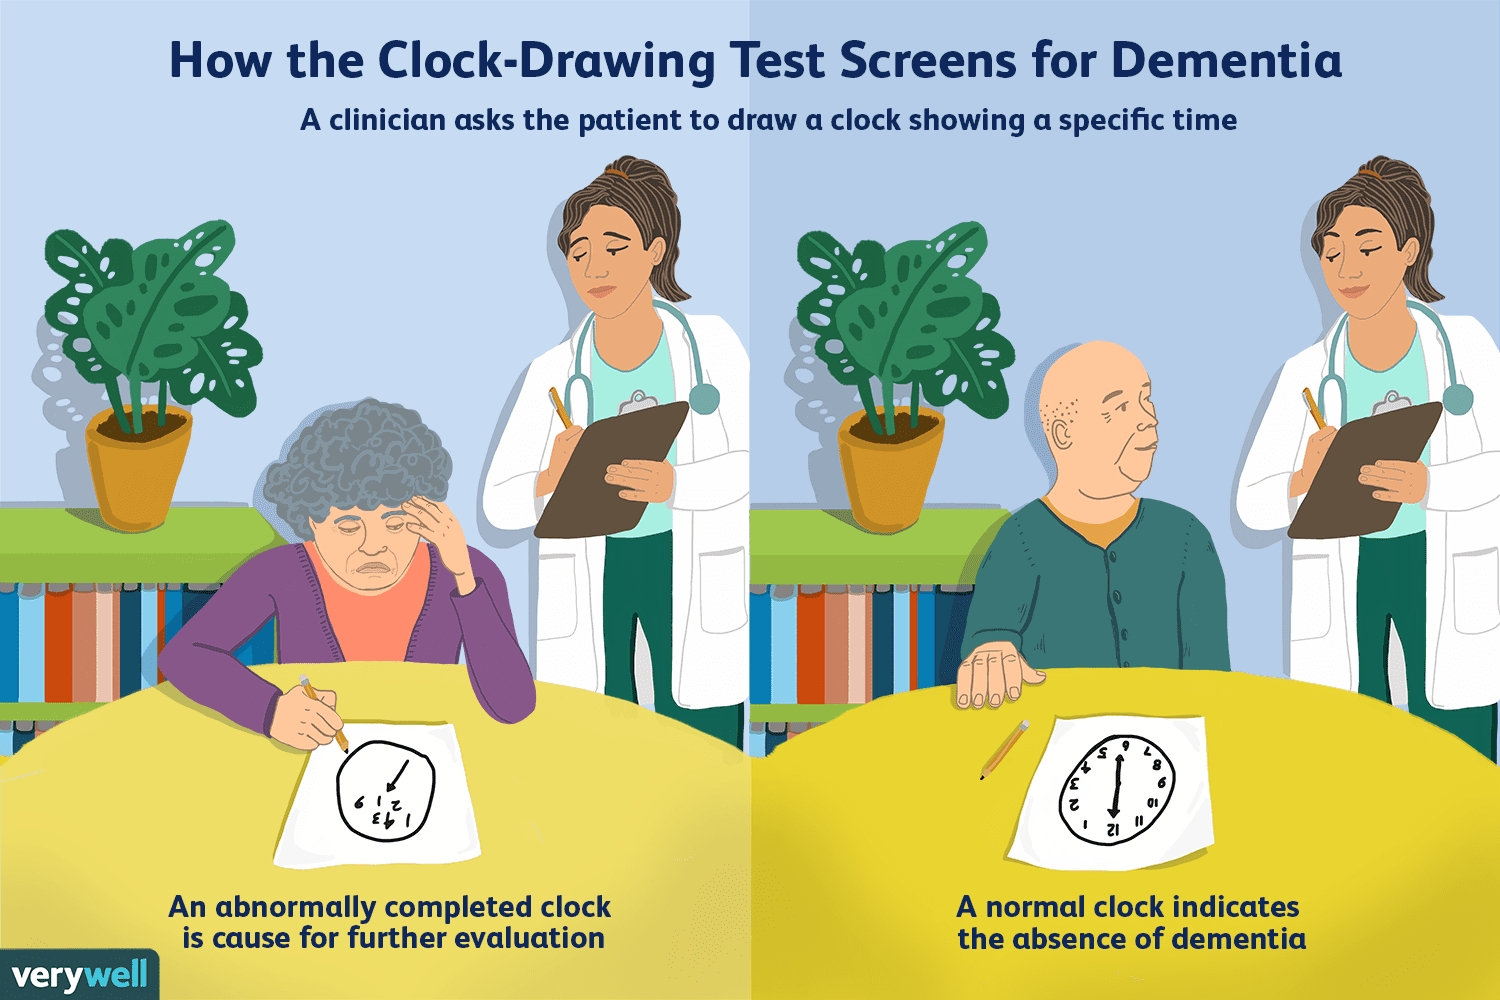 How The Clock-Drawing Test Screens For Dementia